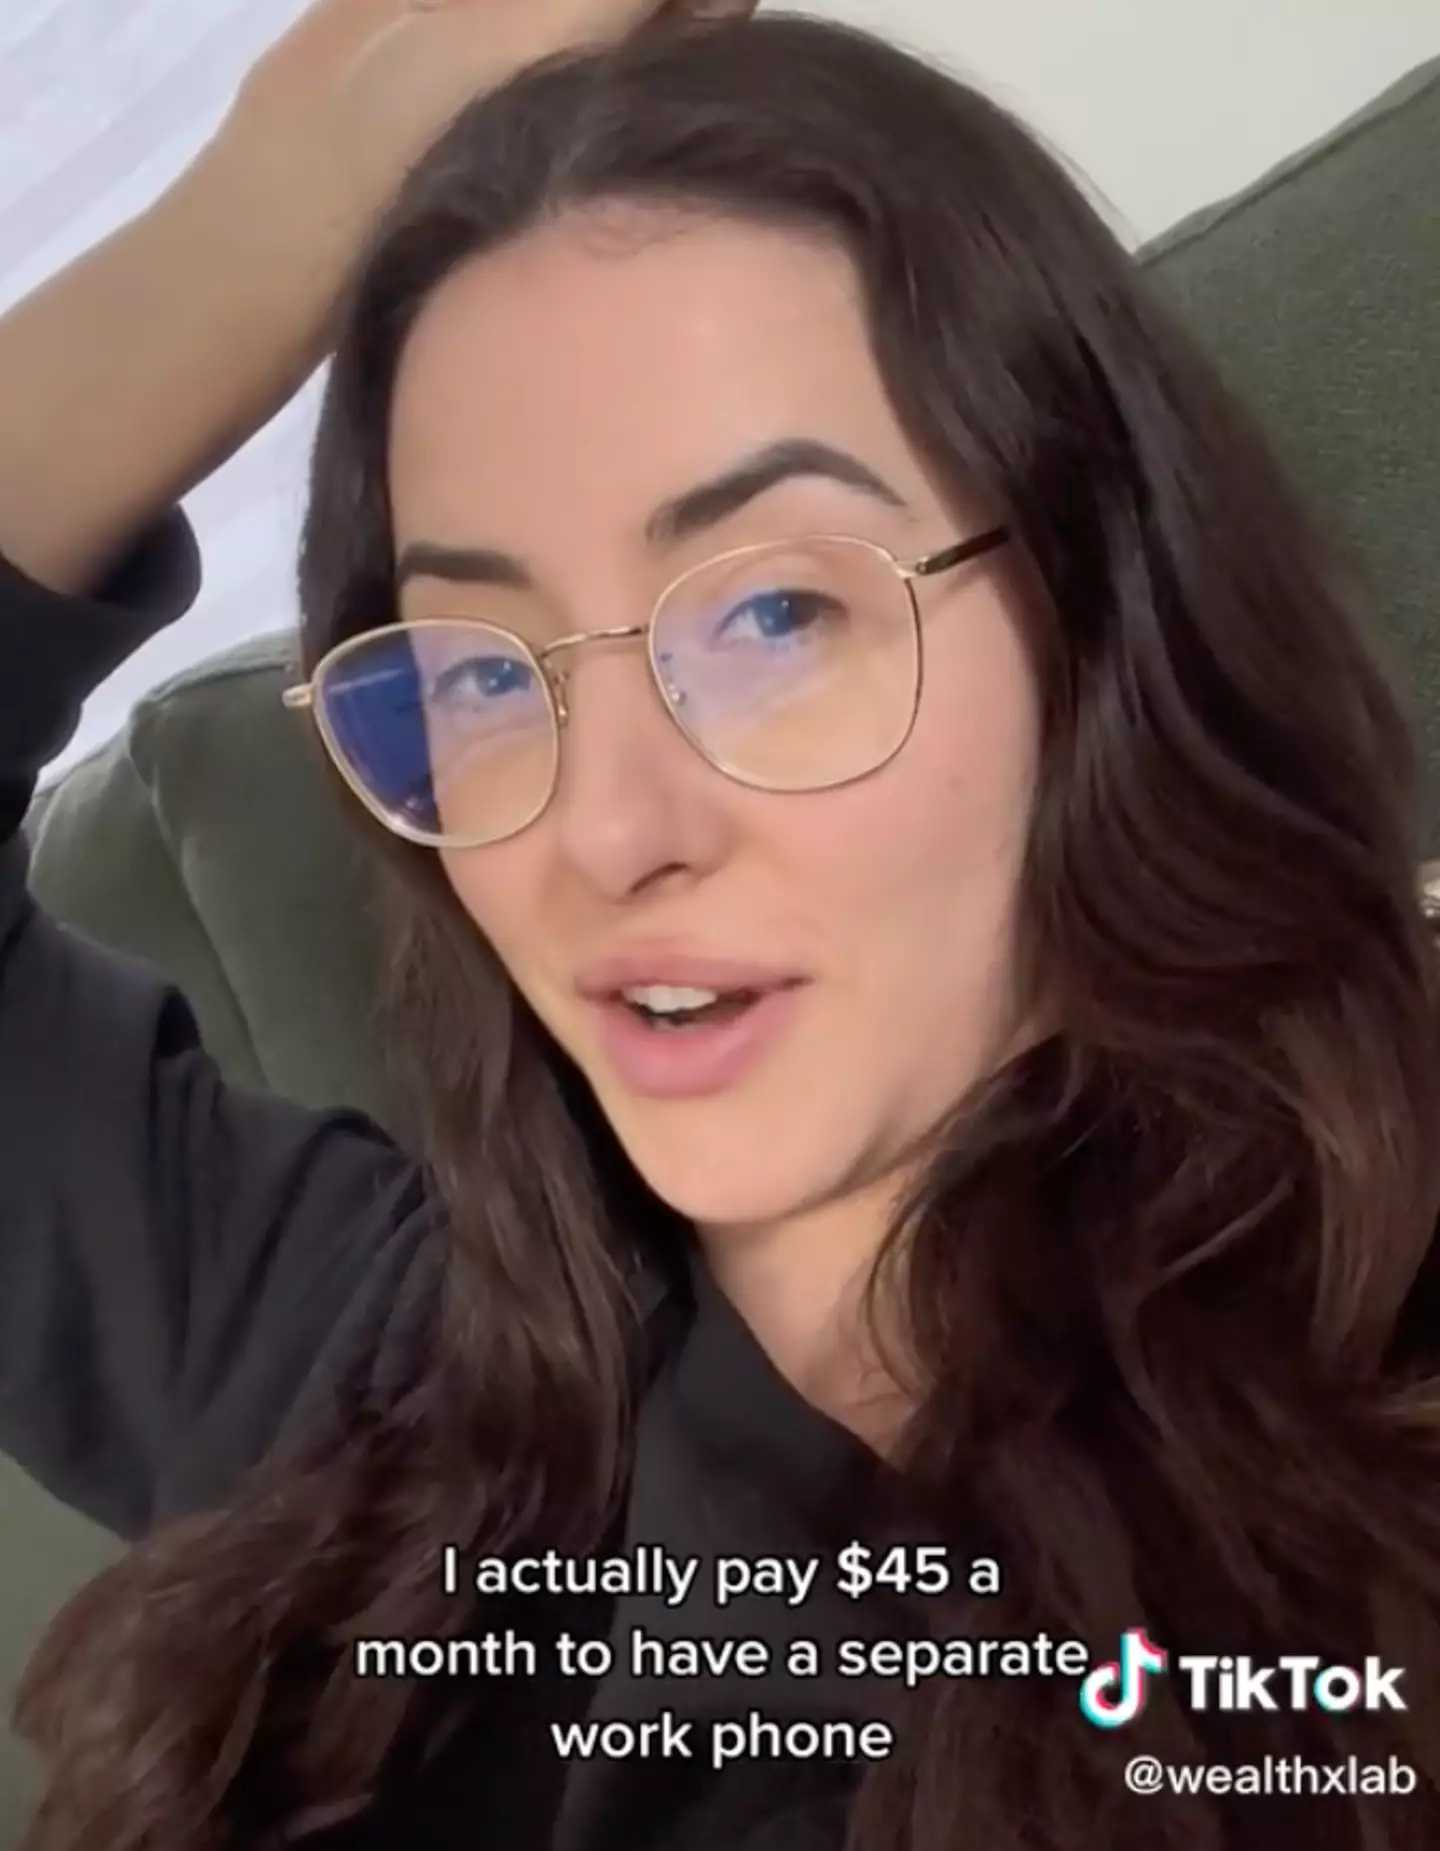 Vanessa pays $45-a-month for her work phone.